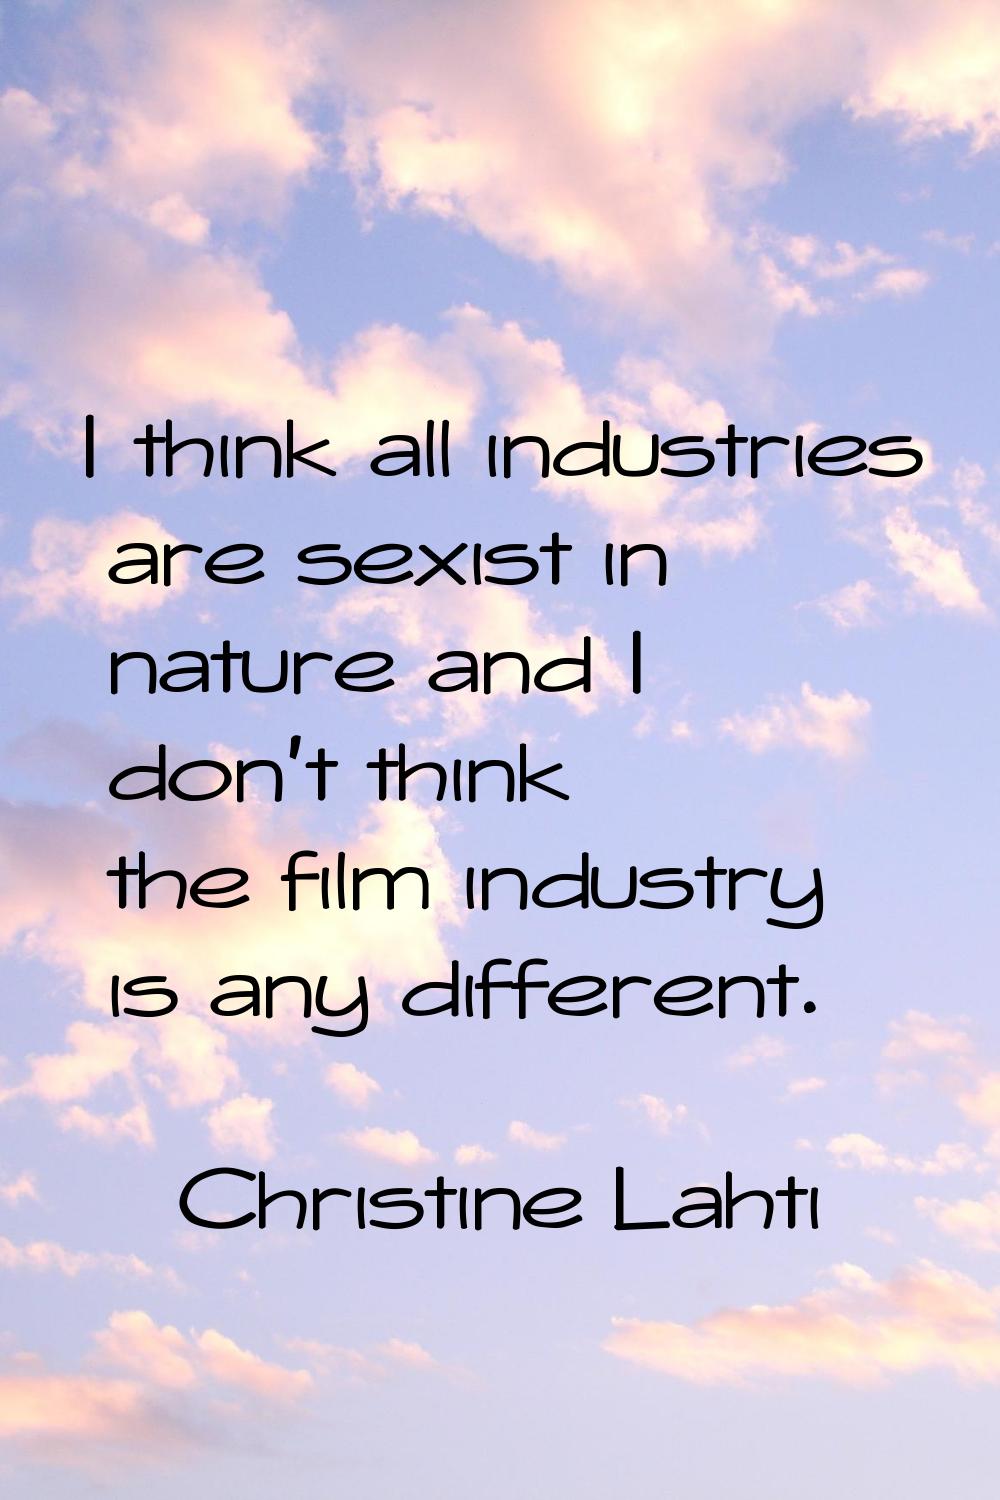 I think all industries are sexist in nature and I don't think the film industry is any different.